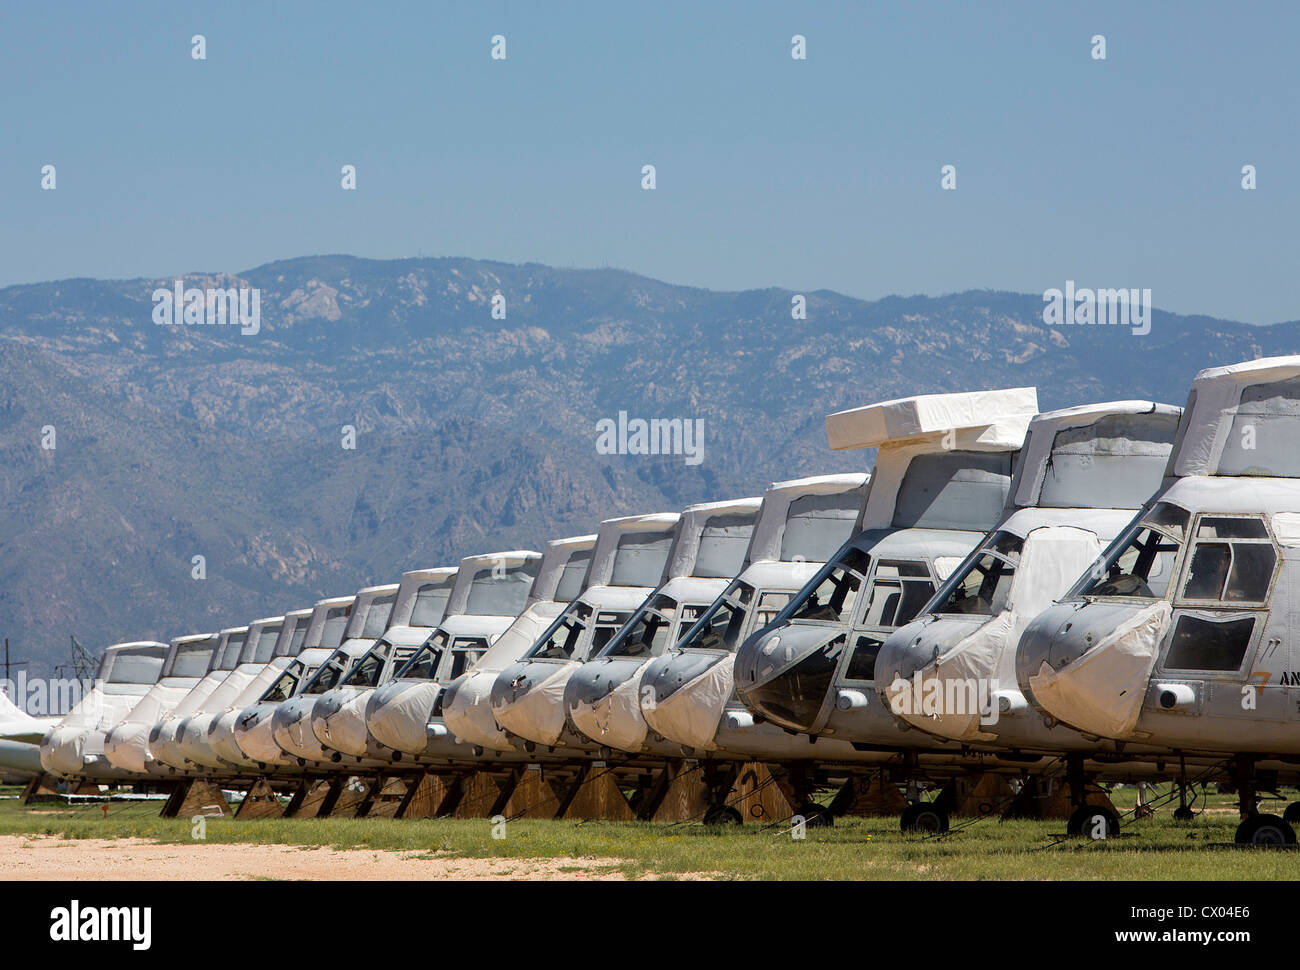 CH-46 Sea Knight helicopters in storage at the 309th Aerospace Maintenance and Regeneration Group at Davis-Monthan AFB. Stock Photo